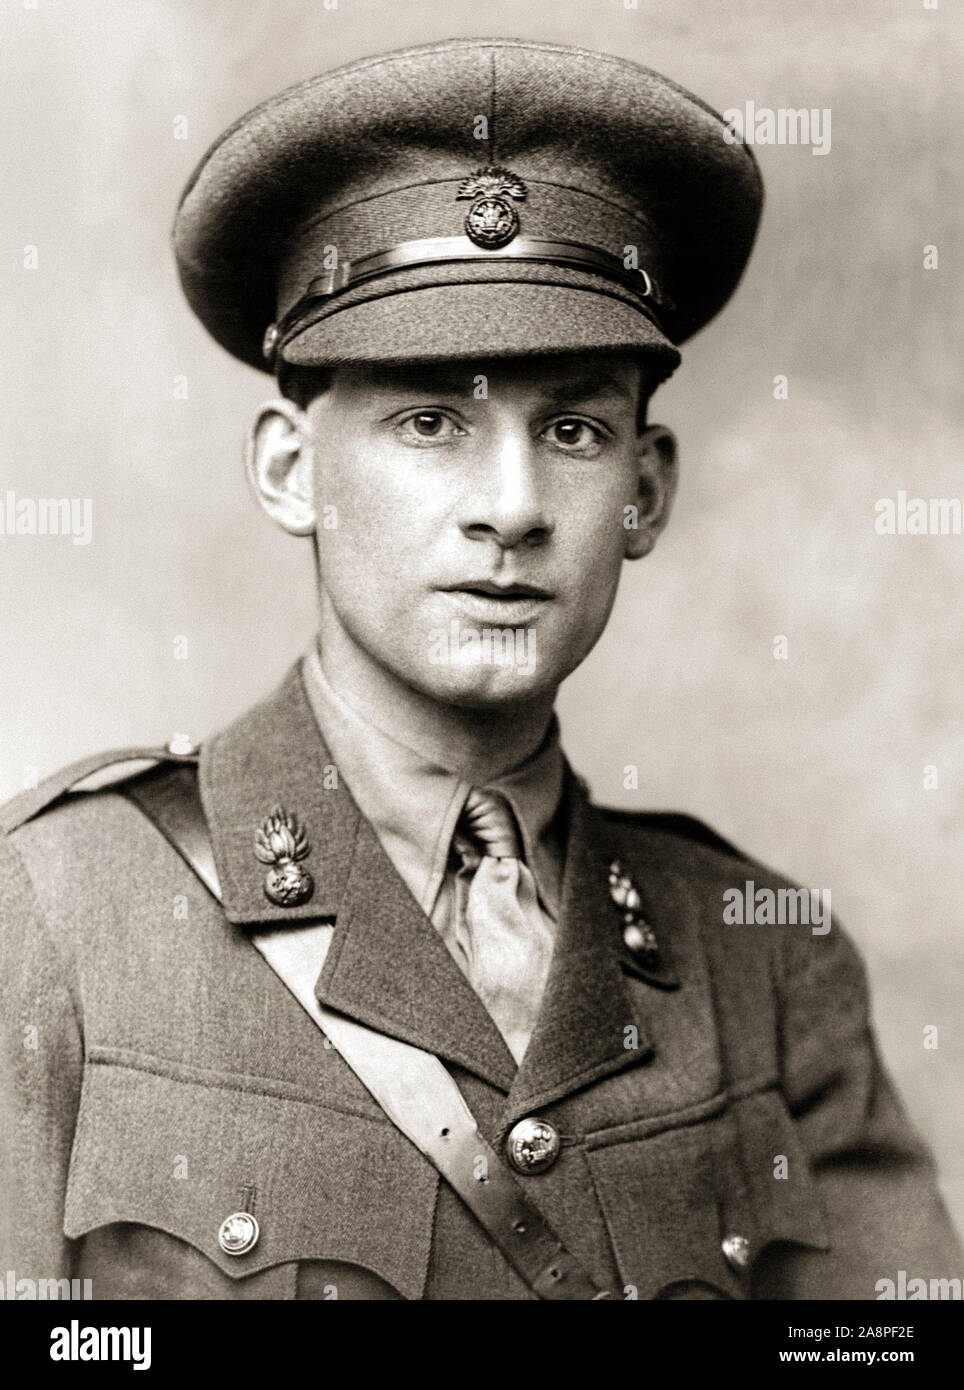 Siegfried Sassoon (1886-1967) English poet, writer and soldier best remembered for the Sherston trilogy and for championing the poetry of his friend Wilfred Owen (1893-1918). Photograph of an original studio photograph by George Charles Beresford (1864-1938) taken in 1915 whilst Sassoon served with the 1st Battalion Royal Welch Fusiliers. Stock Photo